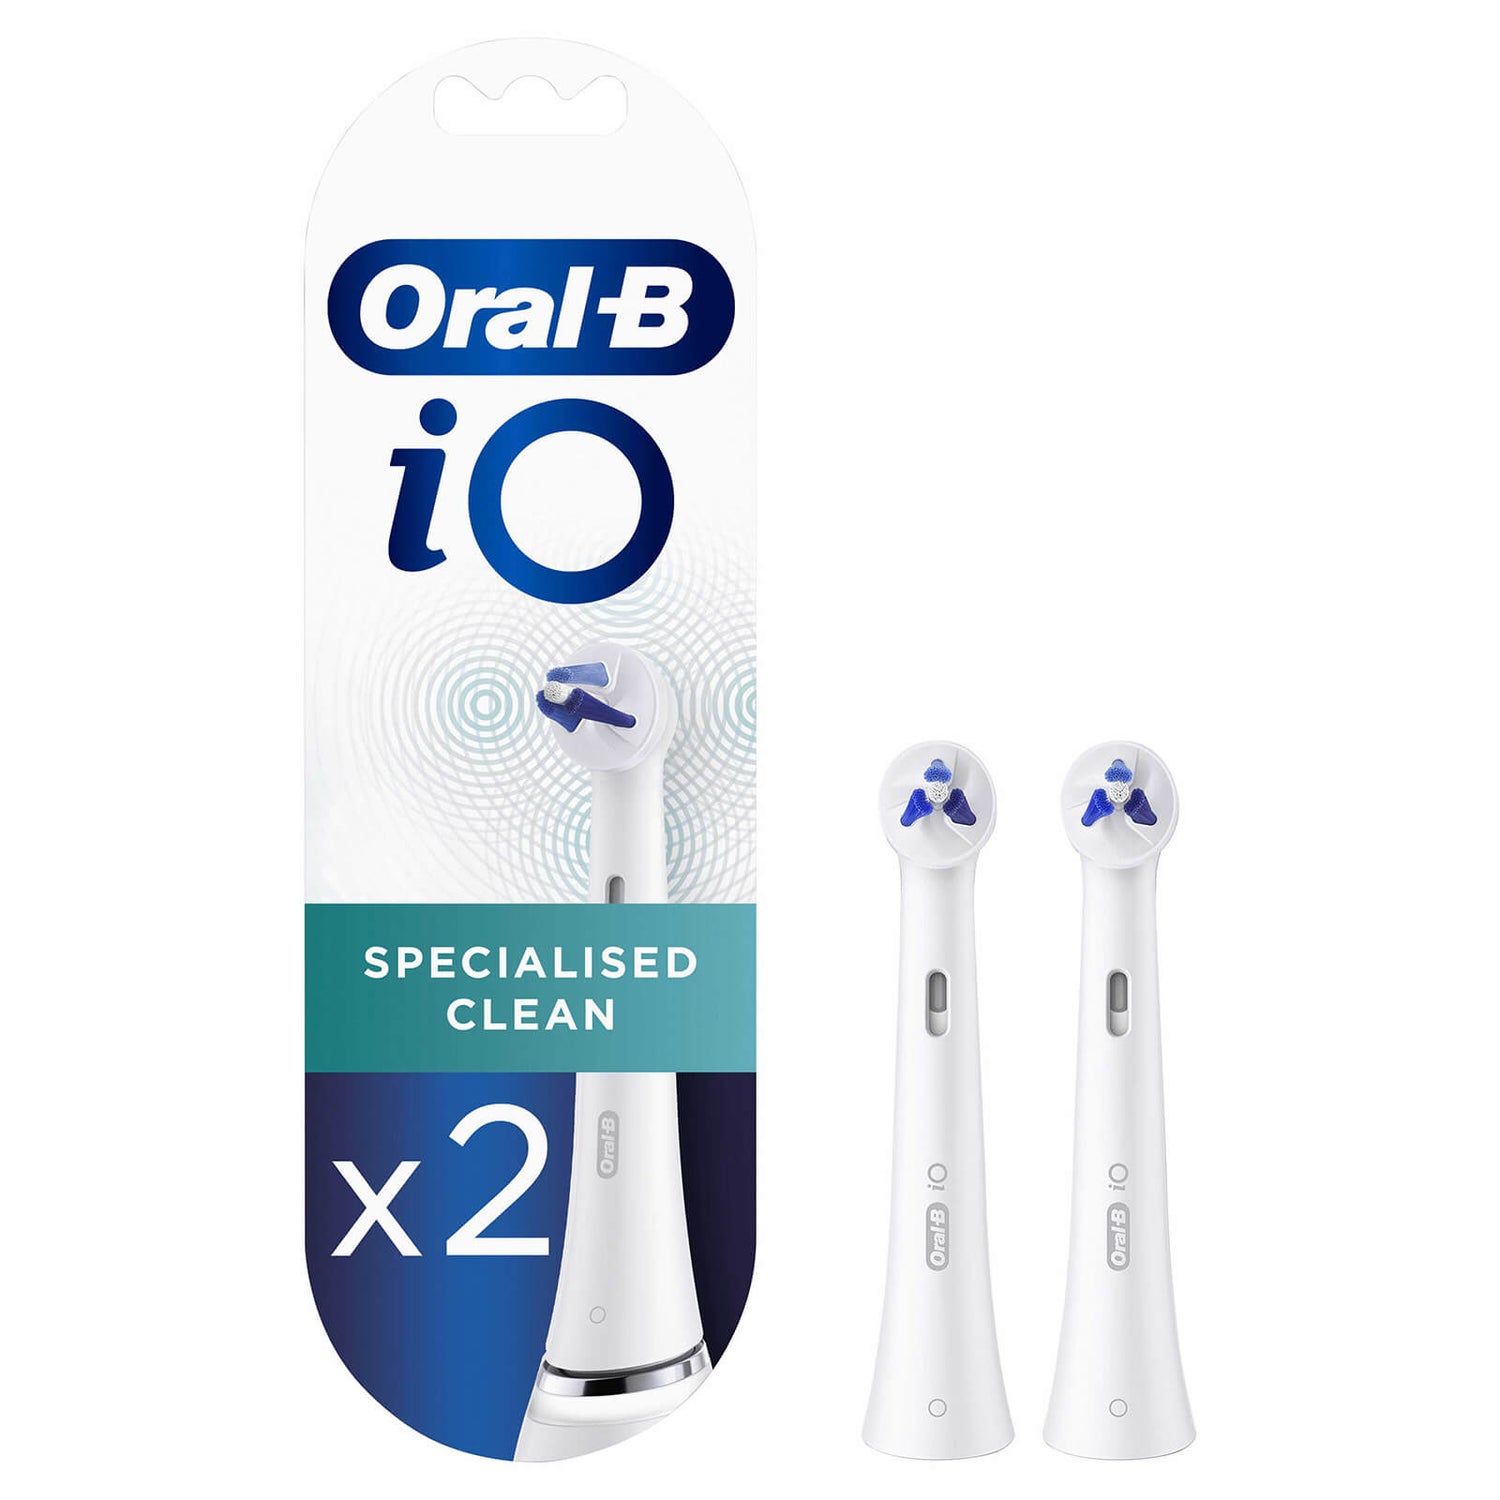 Oral-B iO Specialised Clean Toothbrush Heads, Pack of 2 Counts